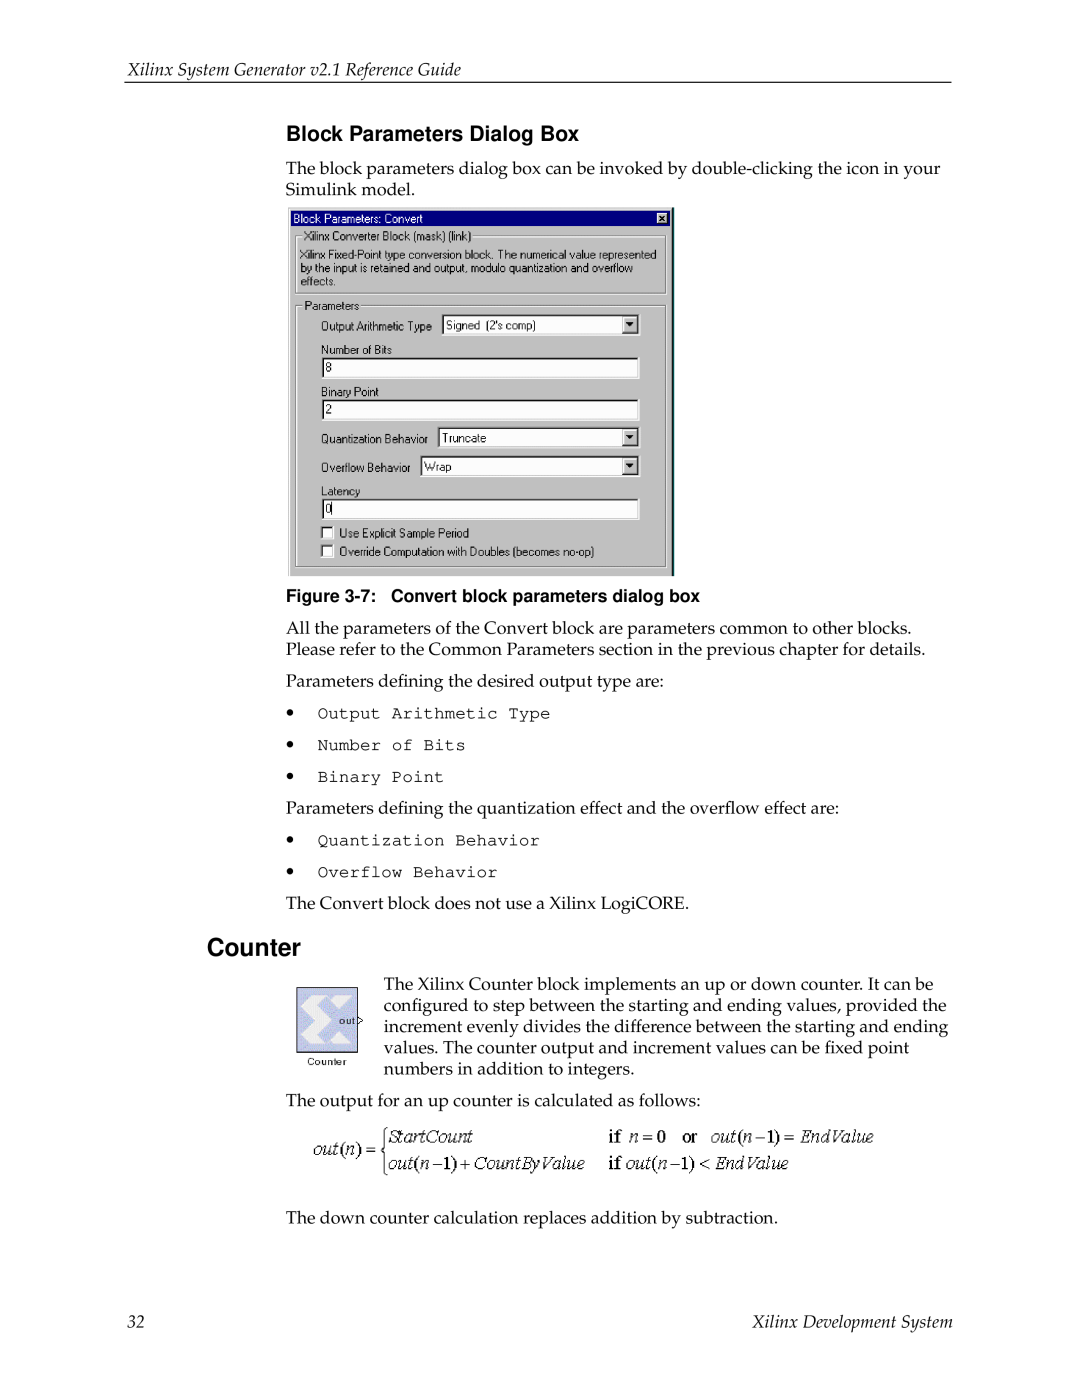 Xilinx V2.1 Counter, Block Parameters Dialog Box, Xilinx System Generator v2.1 Reference Guide, Xilinx Development System 